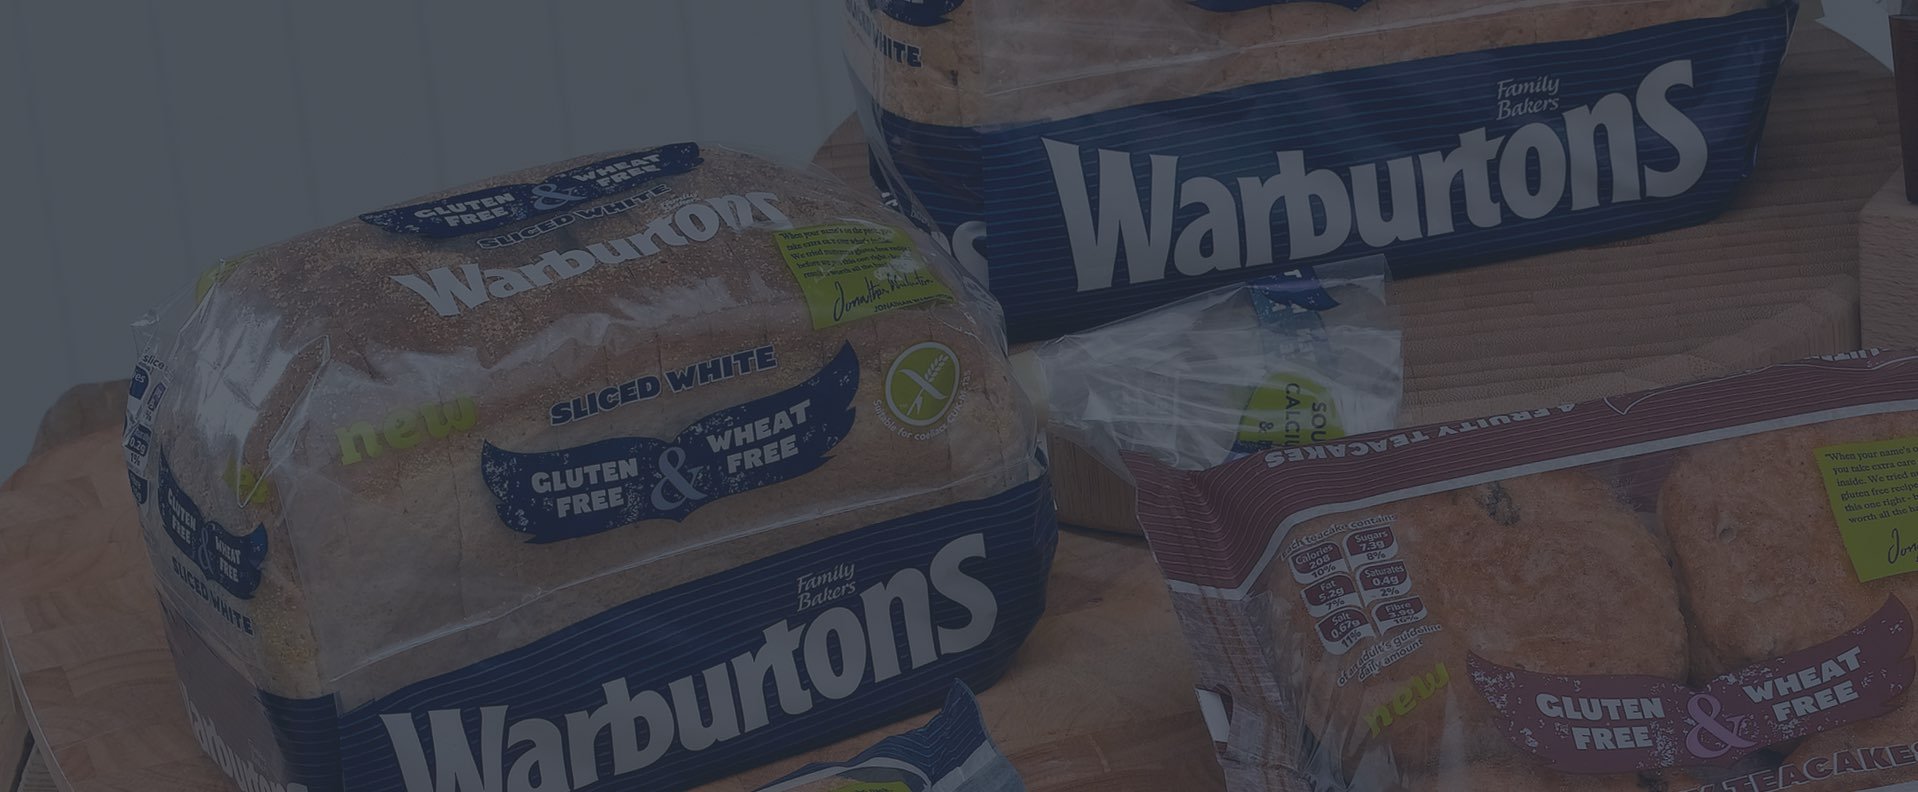 WARBURTONS SAP HCM REPORTS: QUERY MANAGER IS THE BEST THING SINCE SLICED BREAD